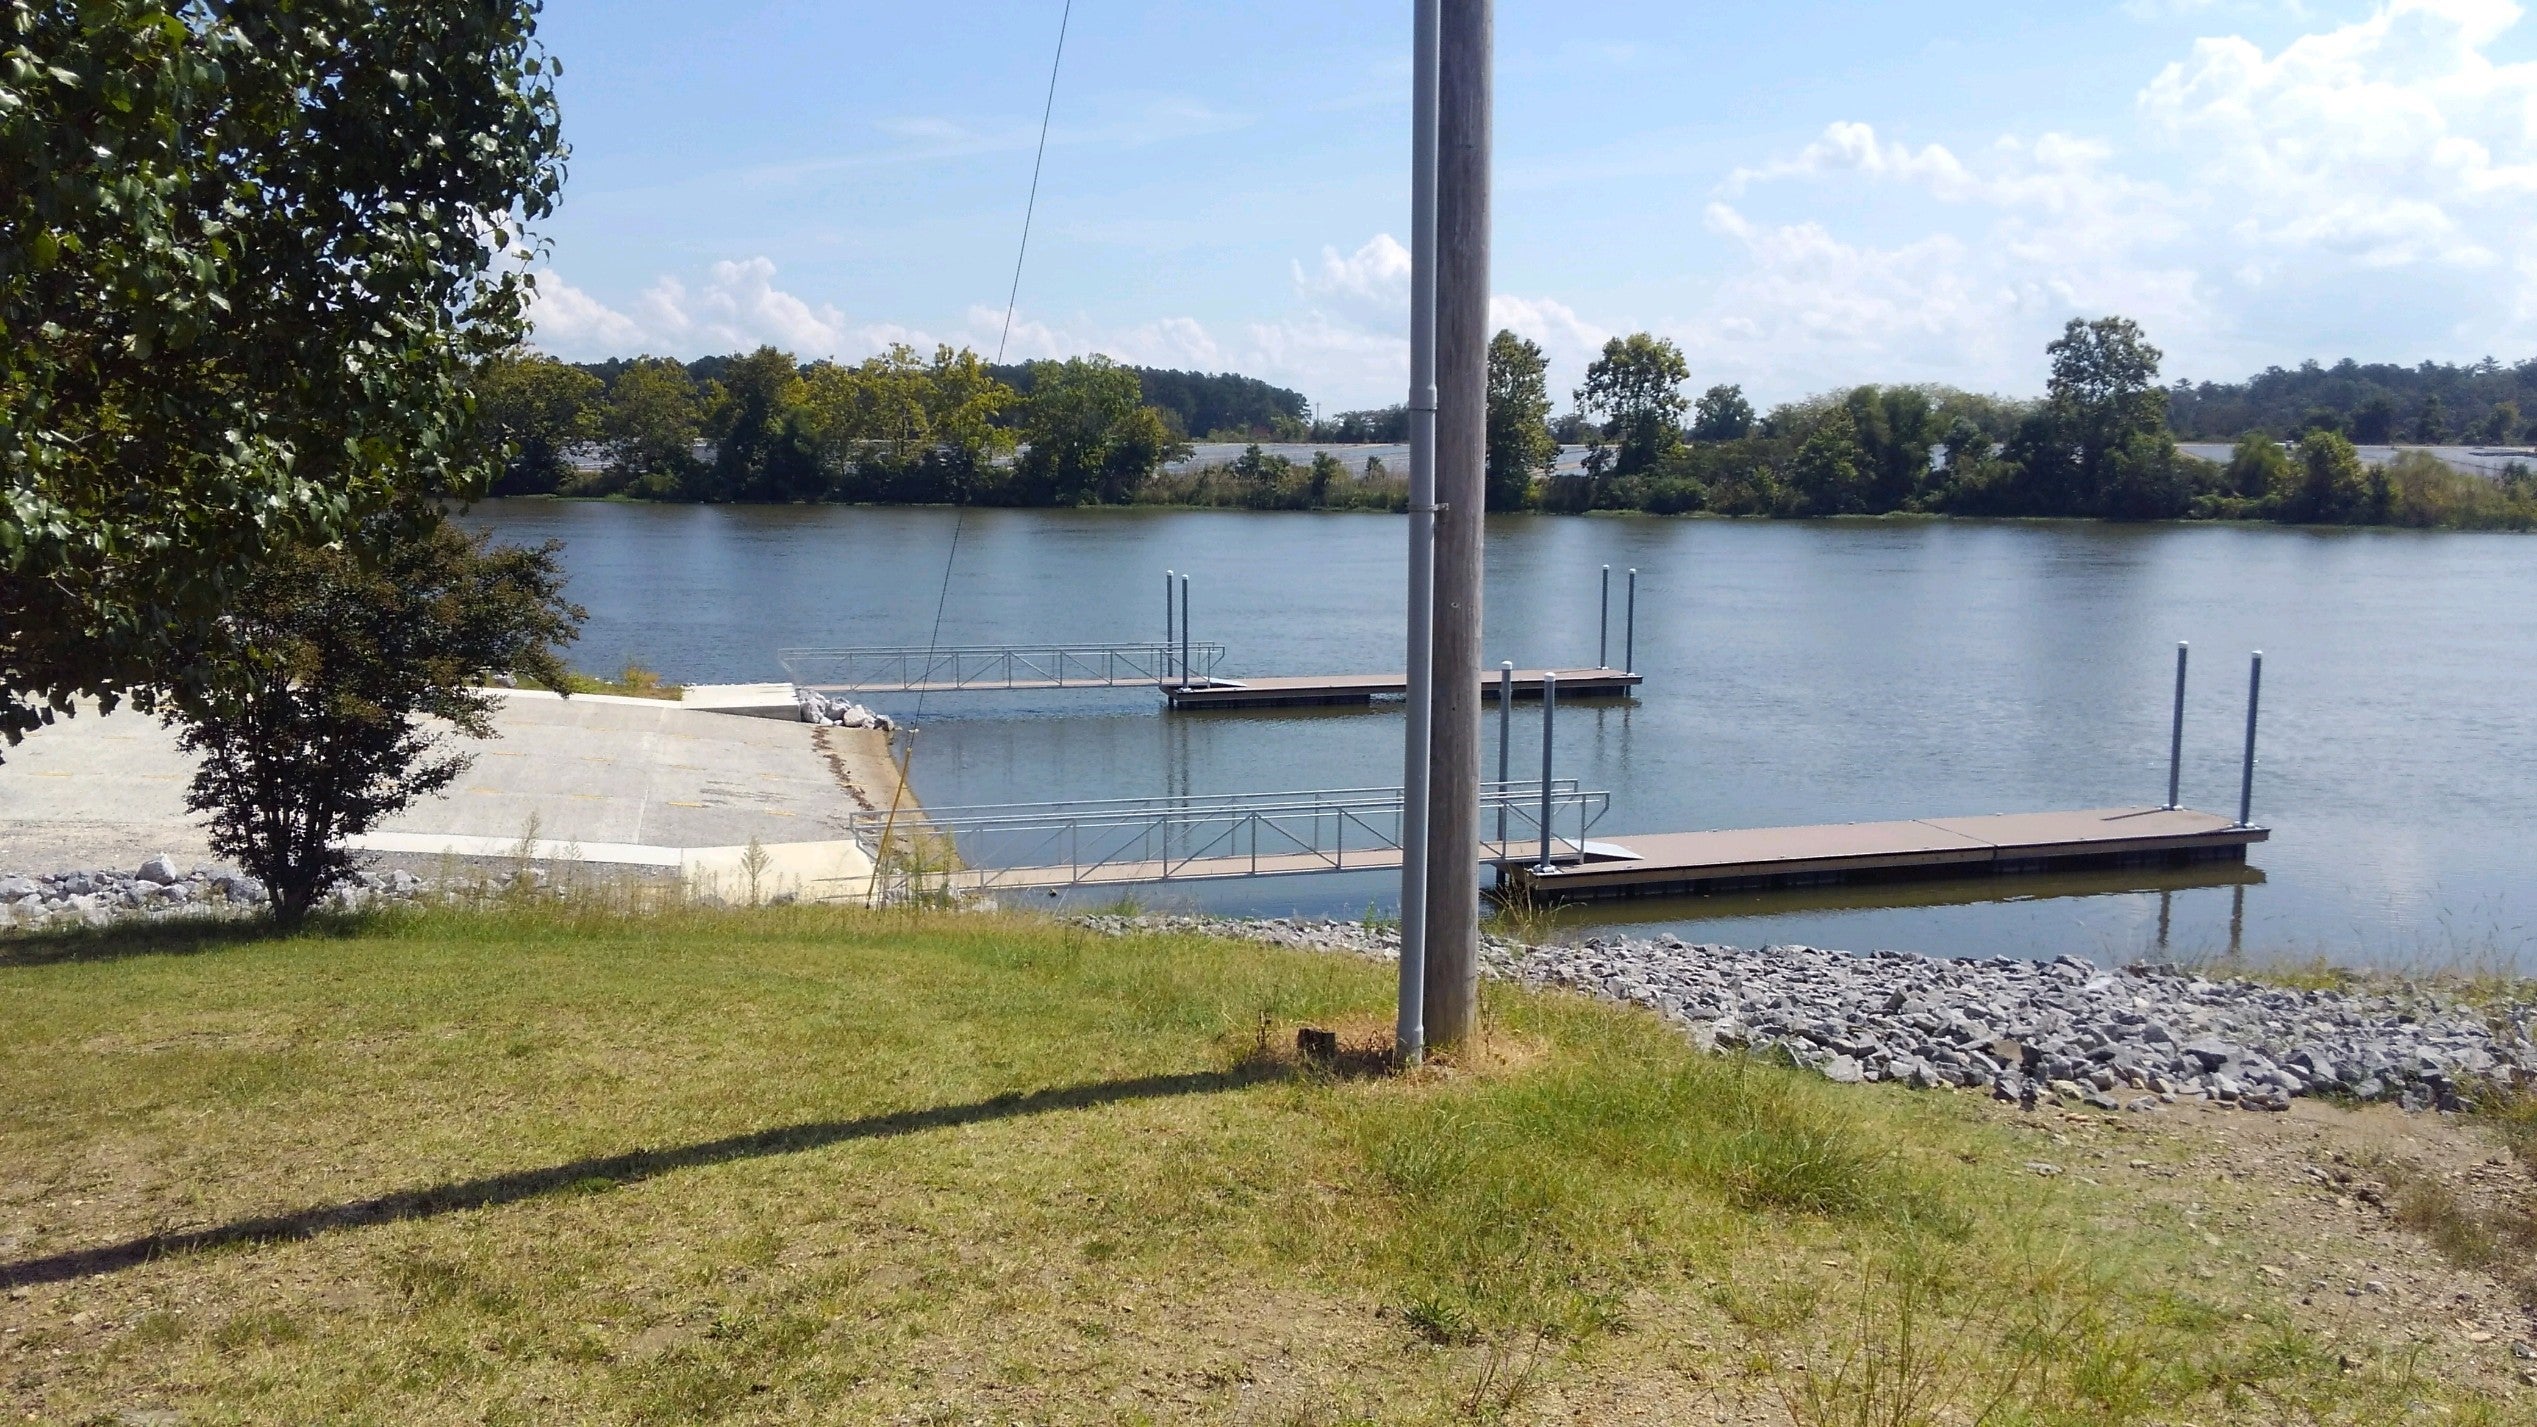 The new Leesburg Boat Landing is large enough to accommodate most local and regional fishing tournaments.